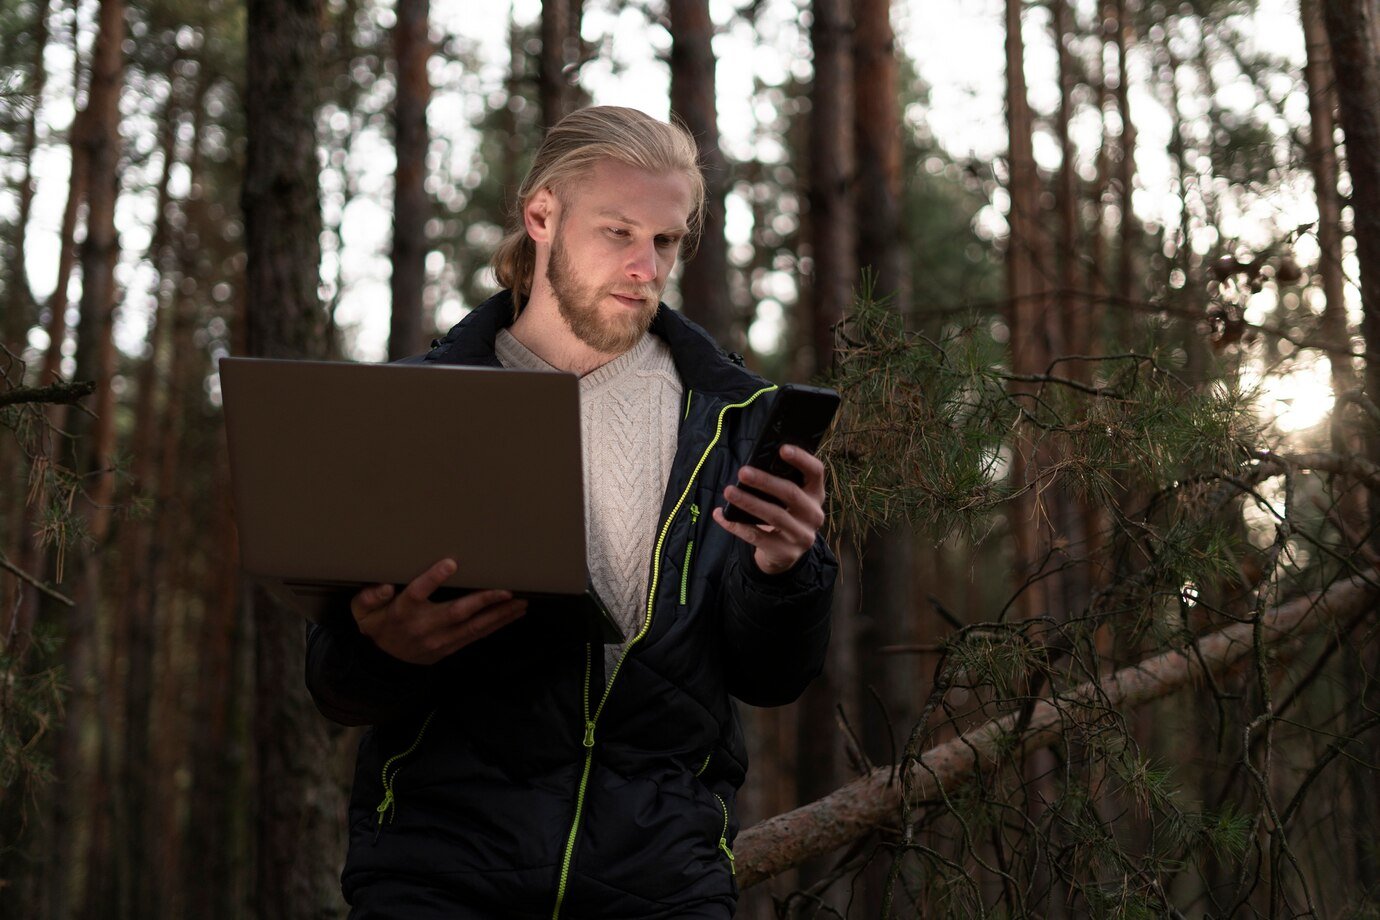 The Future of AI in Forestry